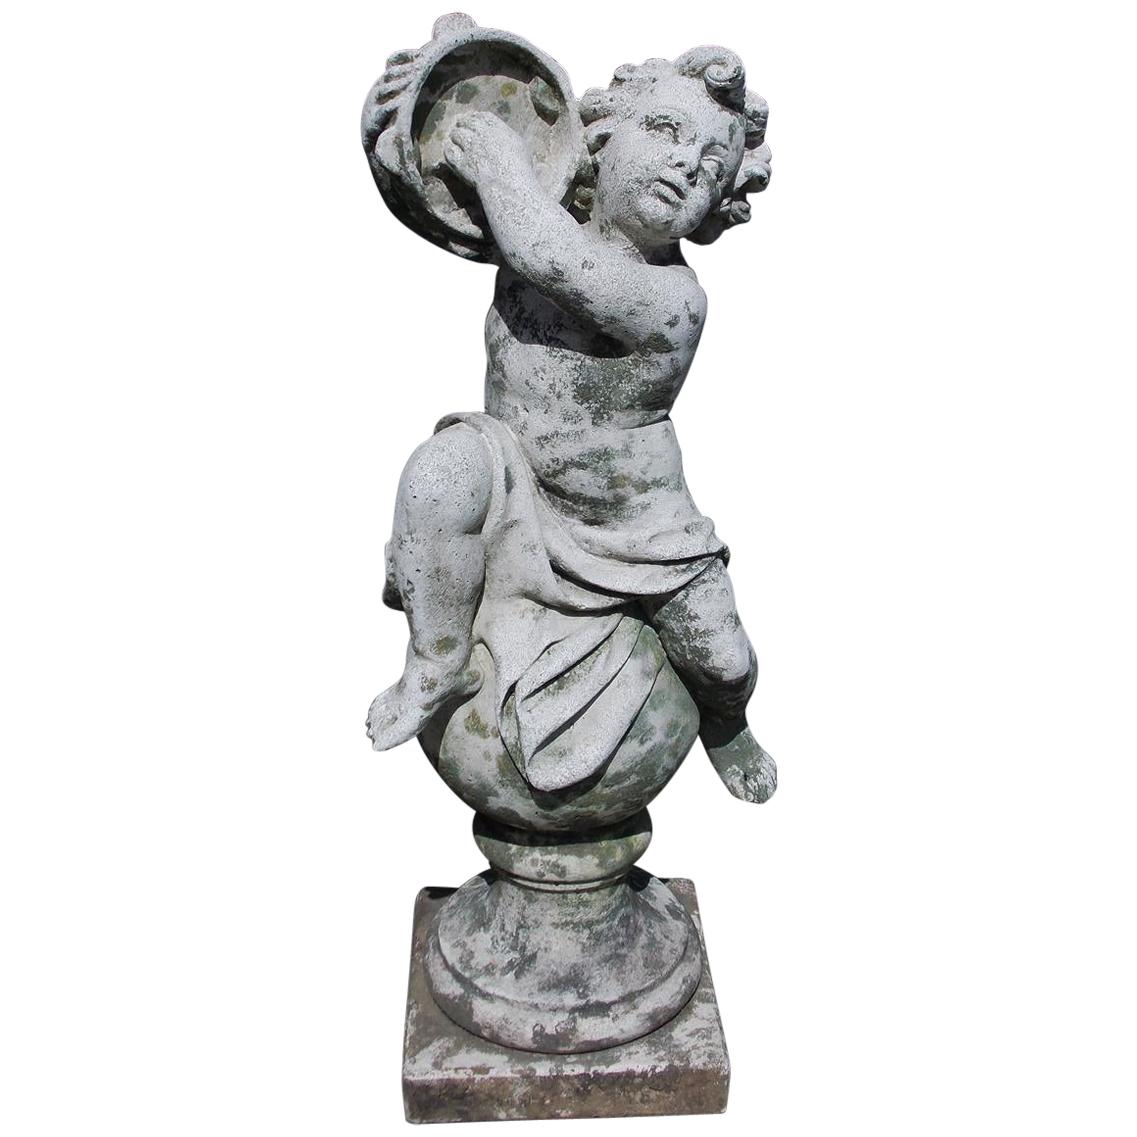 French Cast Stone Musical Putti Garden Ornament Seated on Sphere Plinth, C. 1840 For Sale